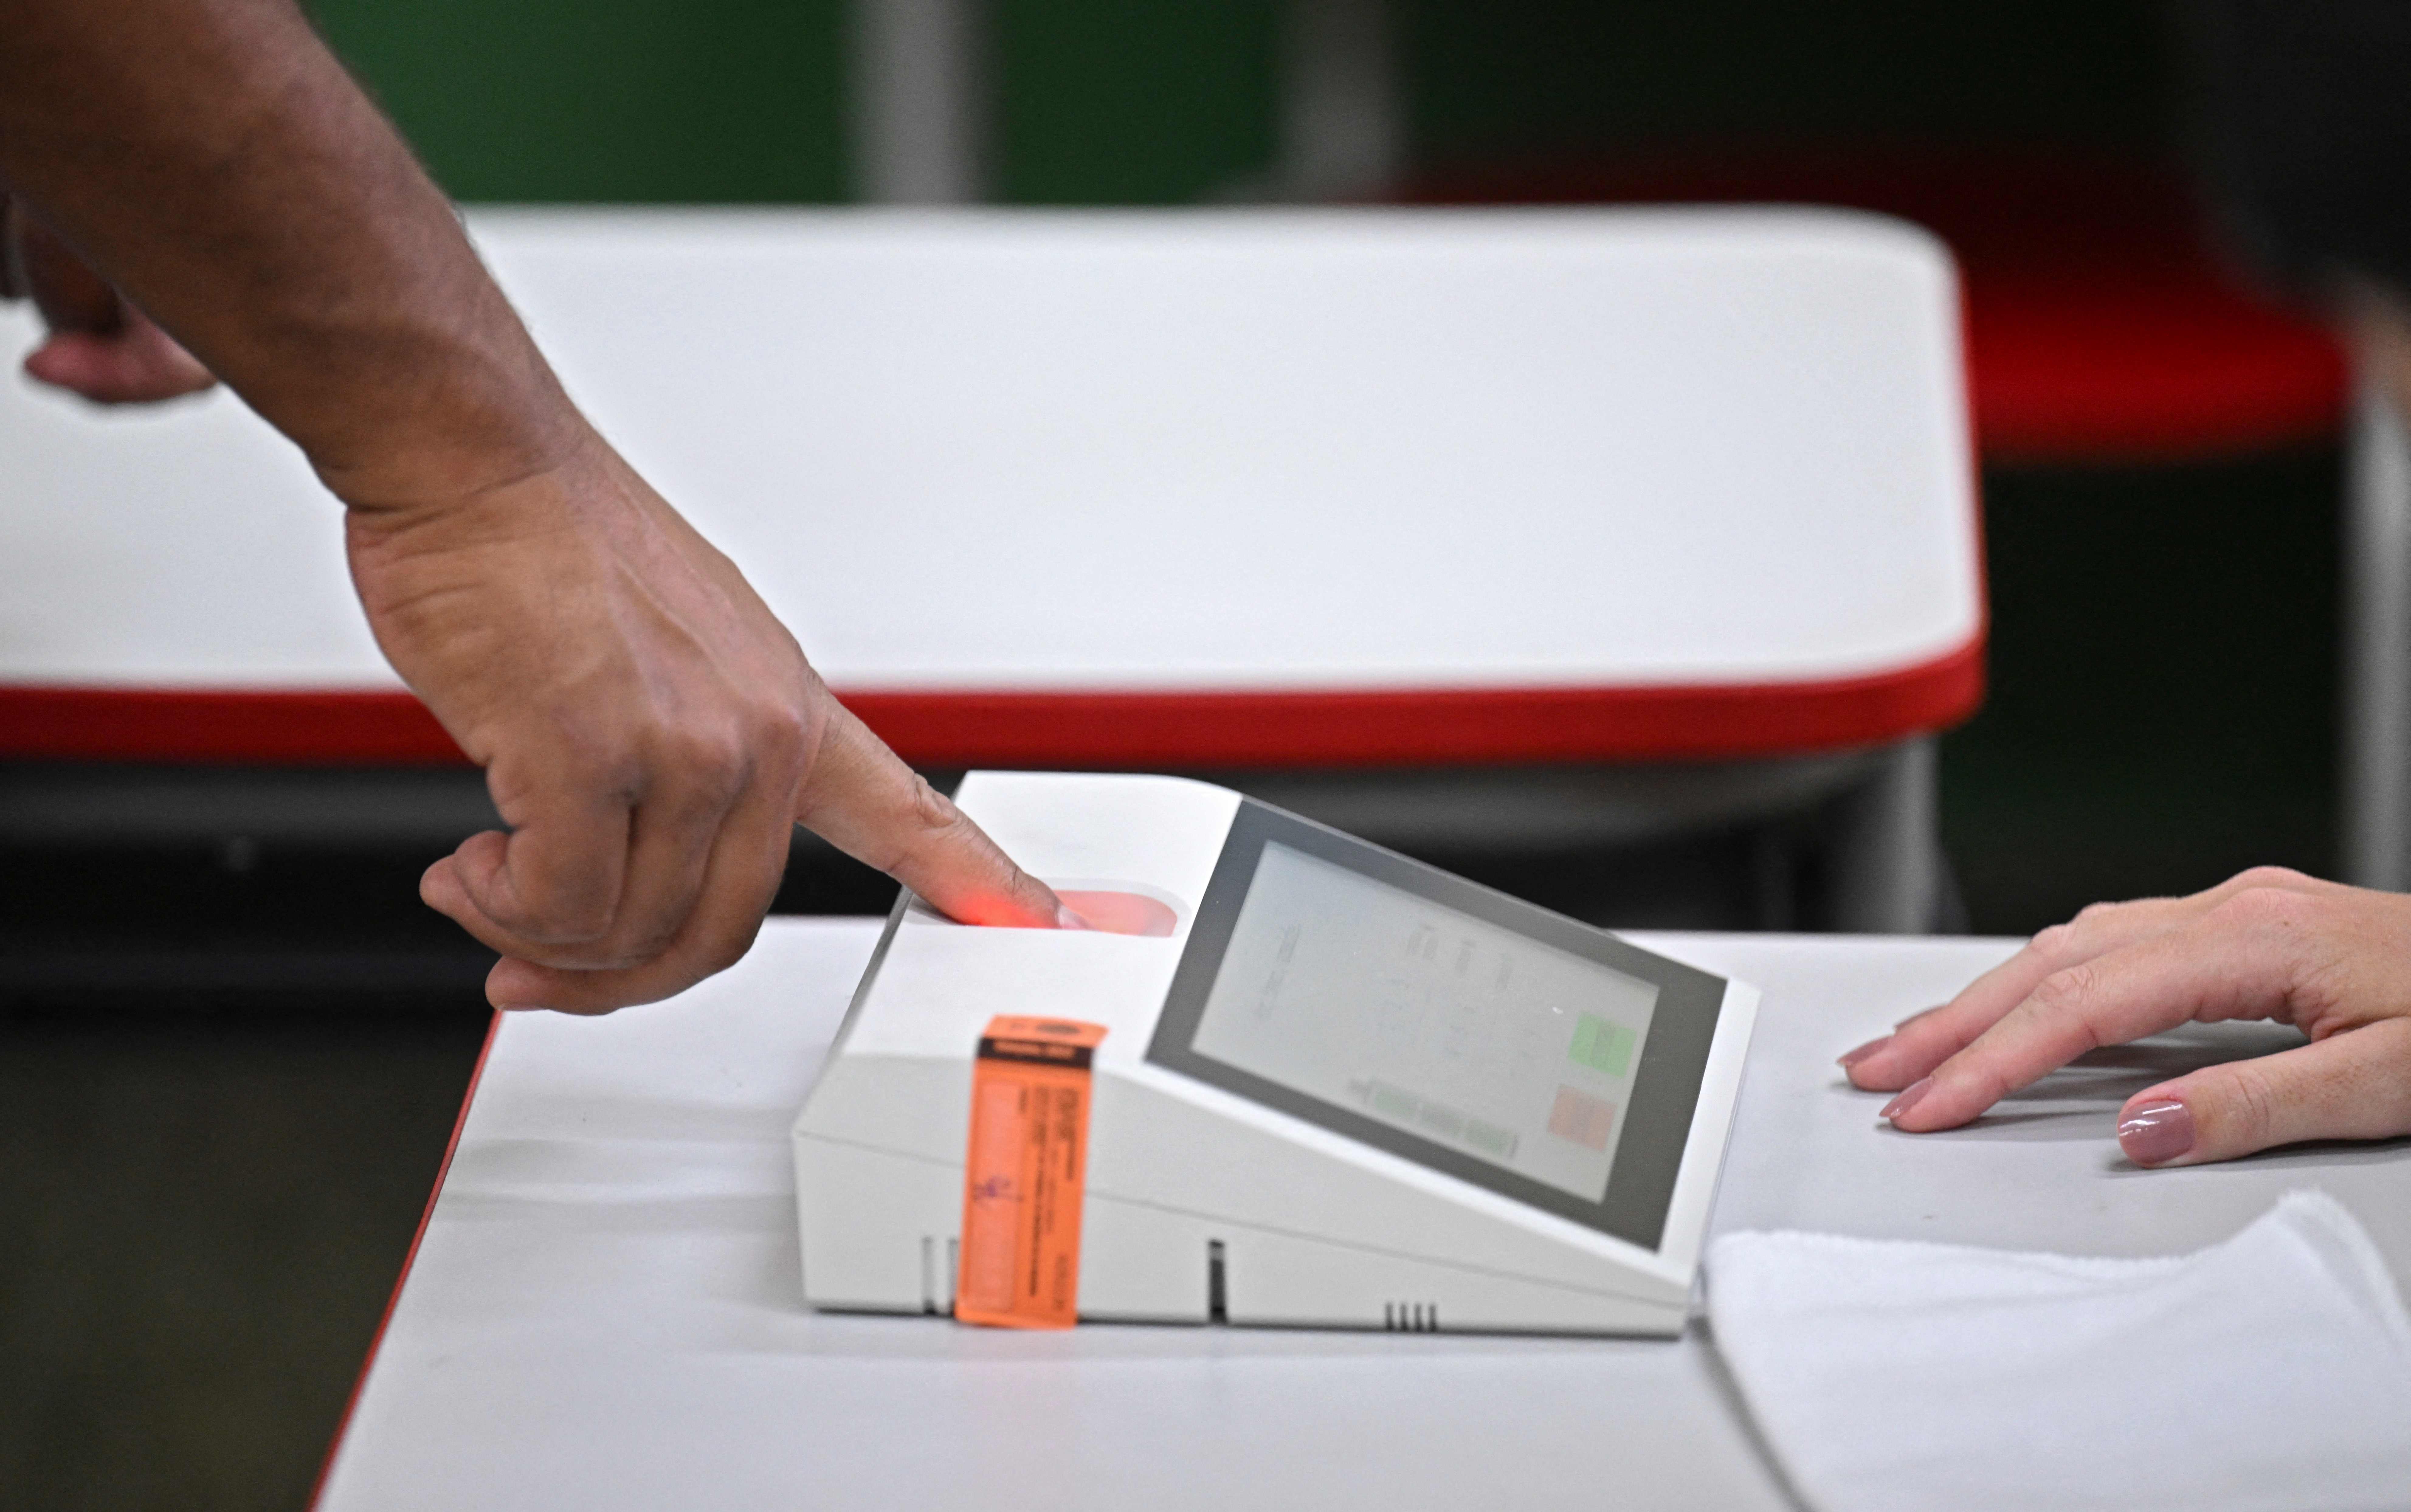 A man puts his finger on an electronic voting machine as he votes at a polling station in Brasilia, on October 30, 2022, during the presidential run-off election. - After a bitterly divisive campaign and inconclusive first-round vote, Brazil elects its next president in a cliffhanger runoff between far-right incumbent Jair Bolsonaro and veteran leftist Luiz Inacio Lula da Silva. (Photo by EVARISTO SA / AFP)